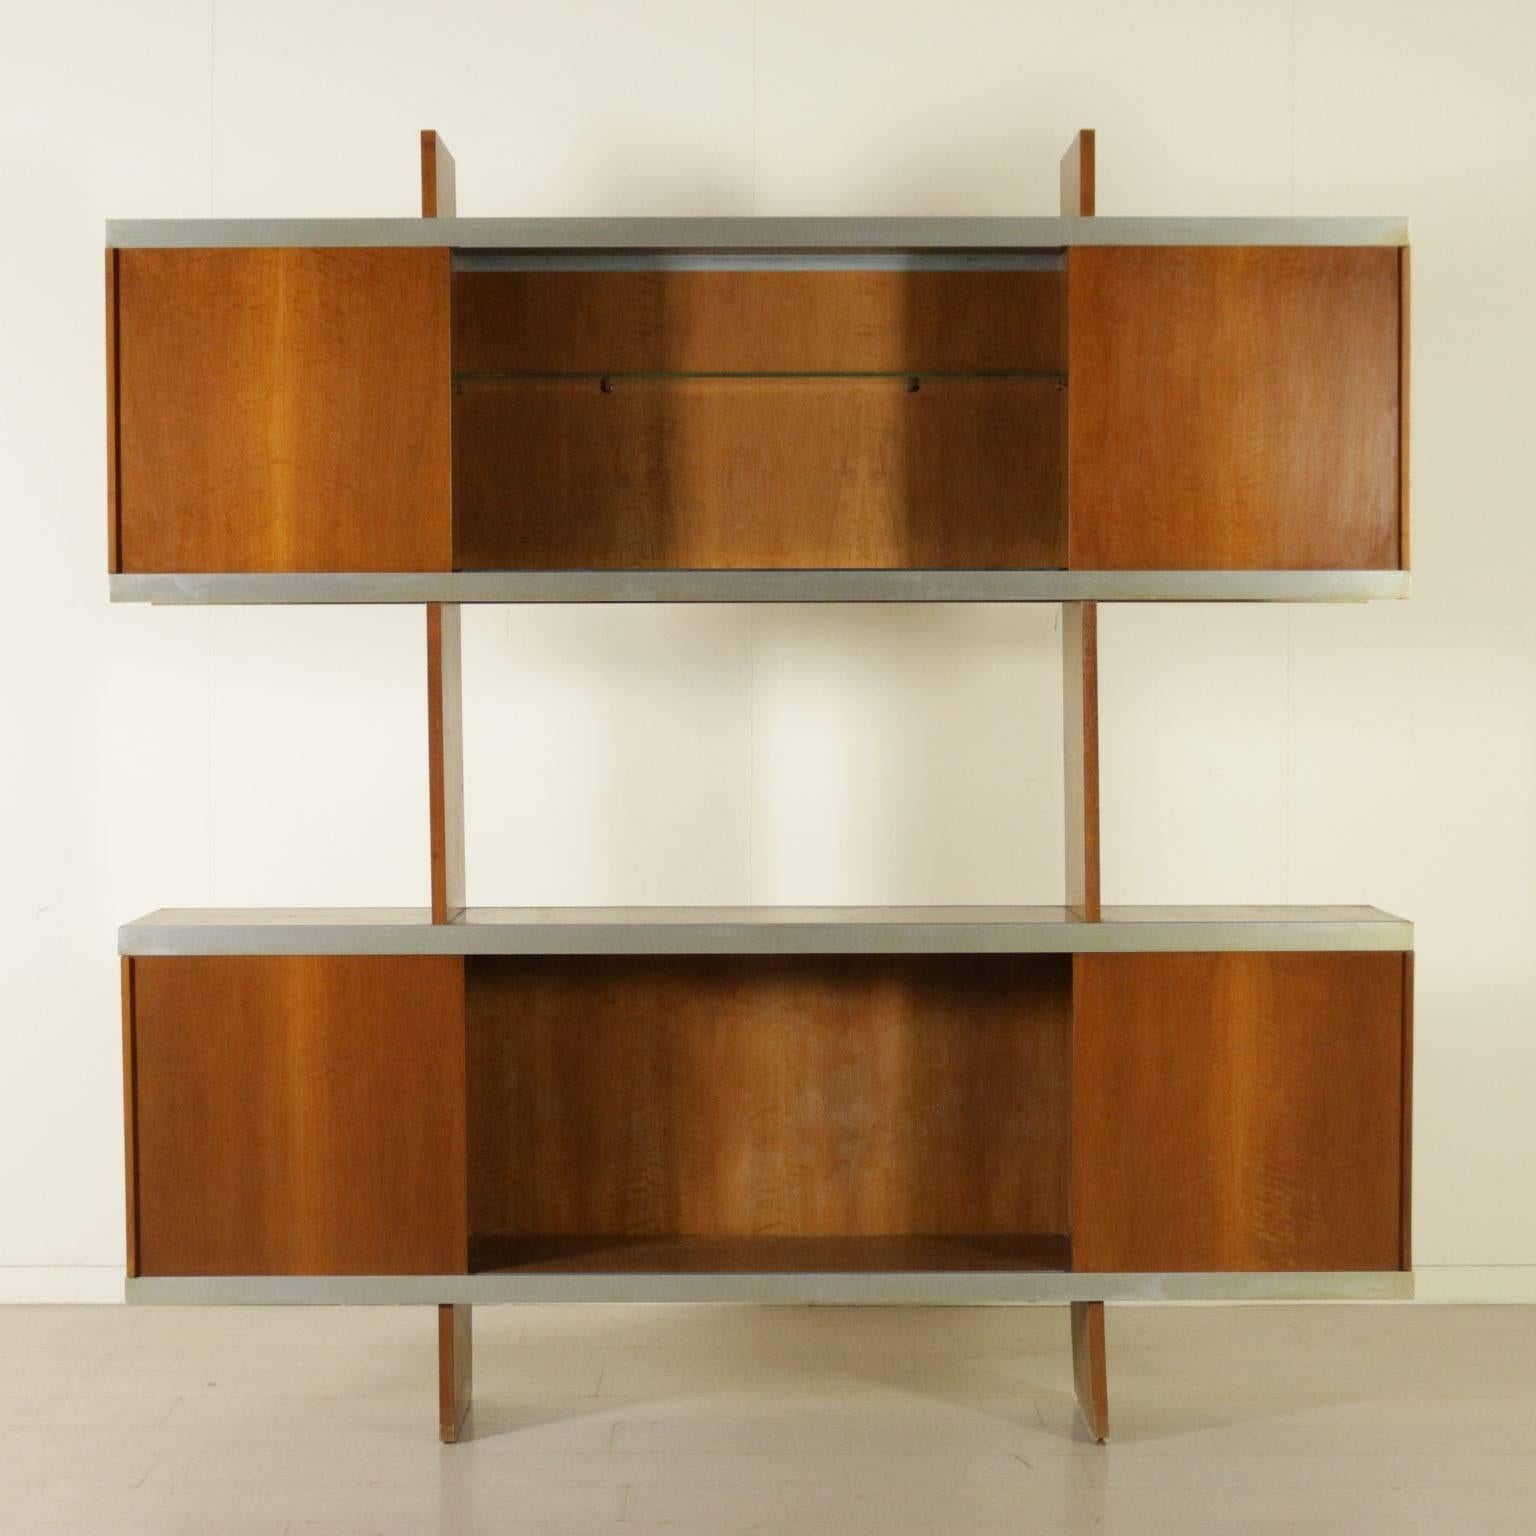 A bookcase with sliding doors on aluminium rails. Designed by Angelo Mangiarotti (1921-2012) for Poltronova in 1965. Model: Multi-use. Tanganika walnut veneer. Manufactured in Italy, 1970s.